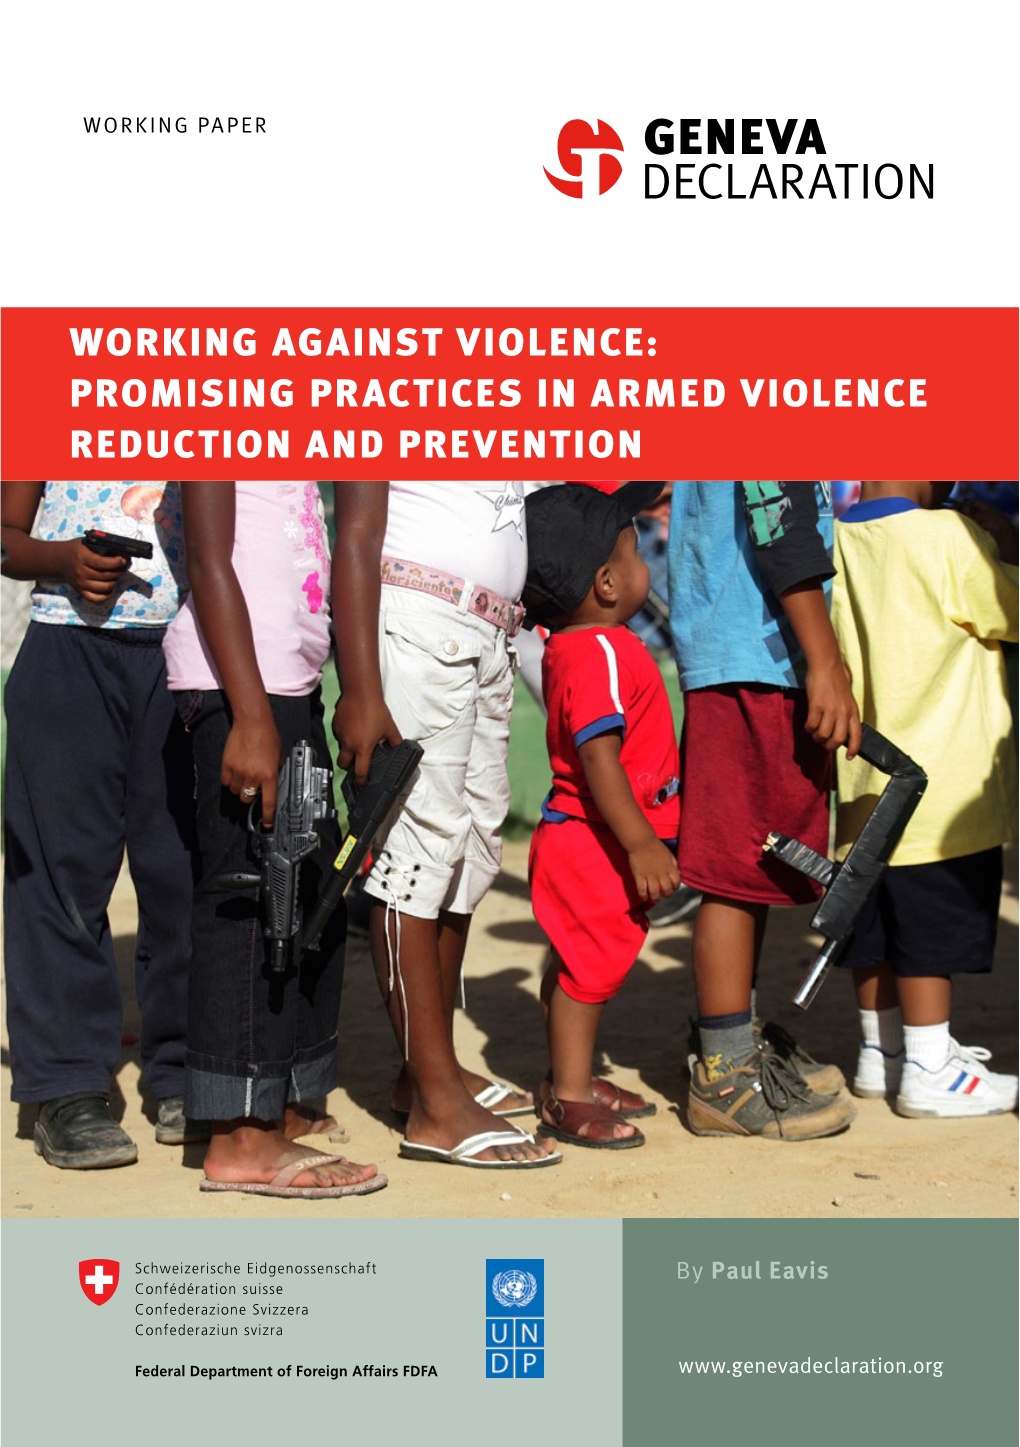 Working Against Violence: Promising Practices in Armed Violence Reduction and Prevention